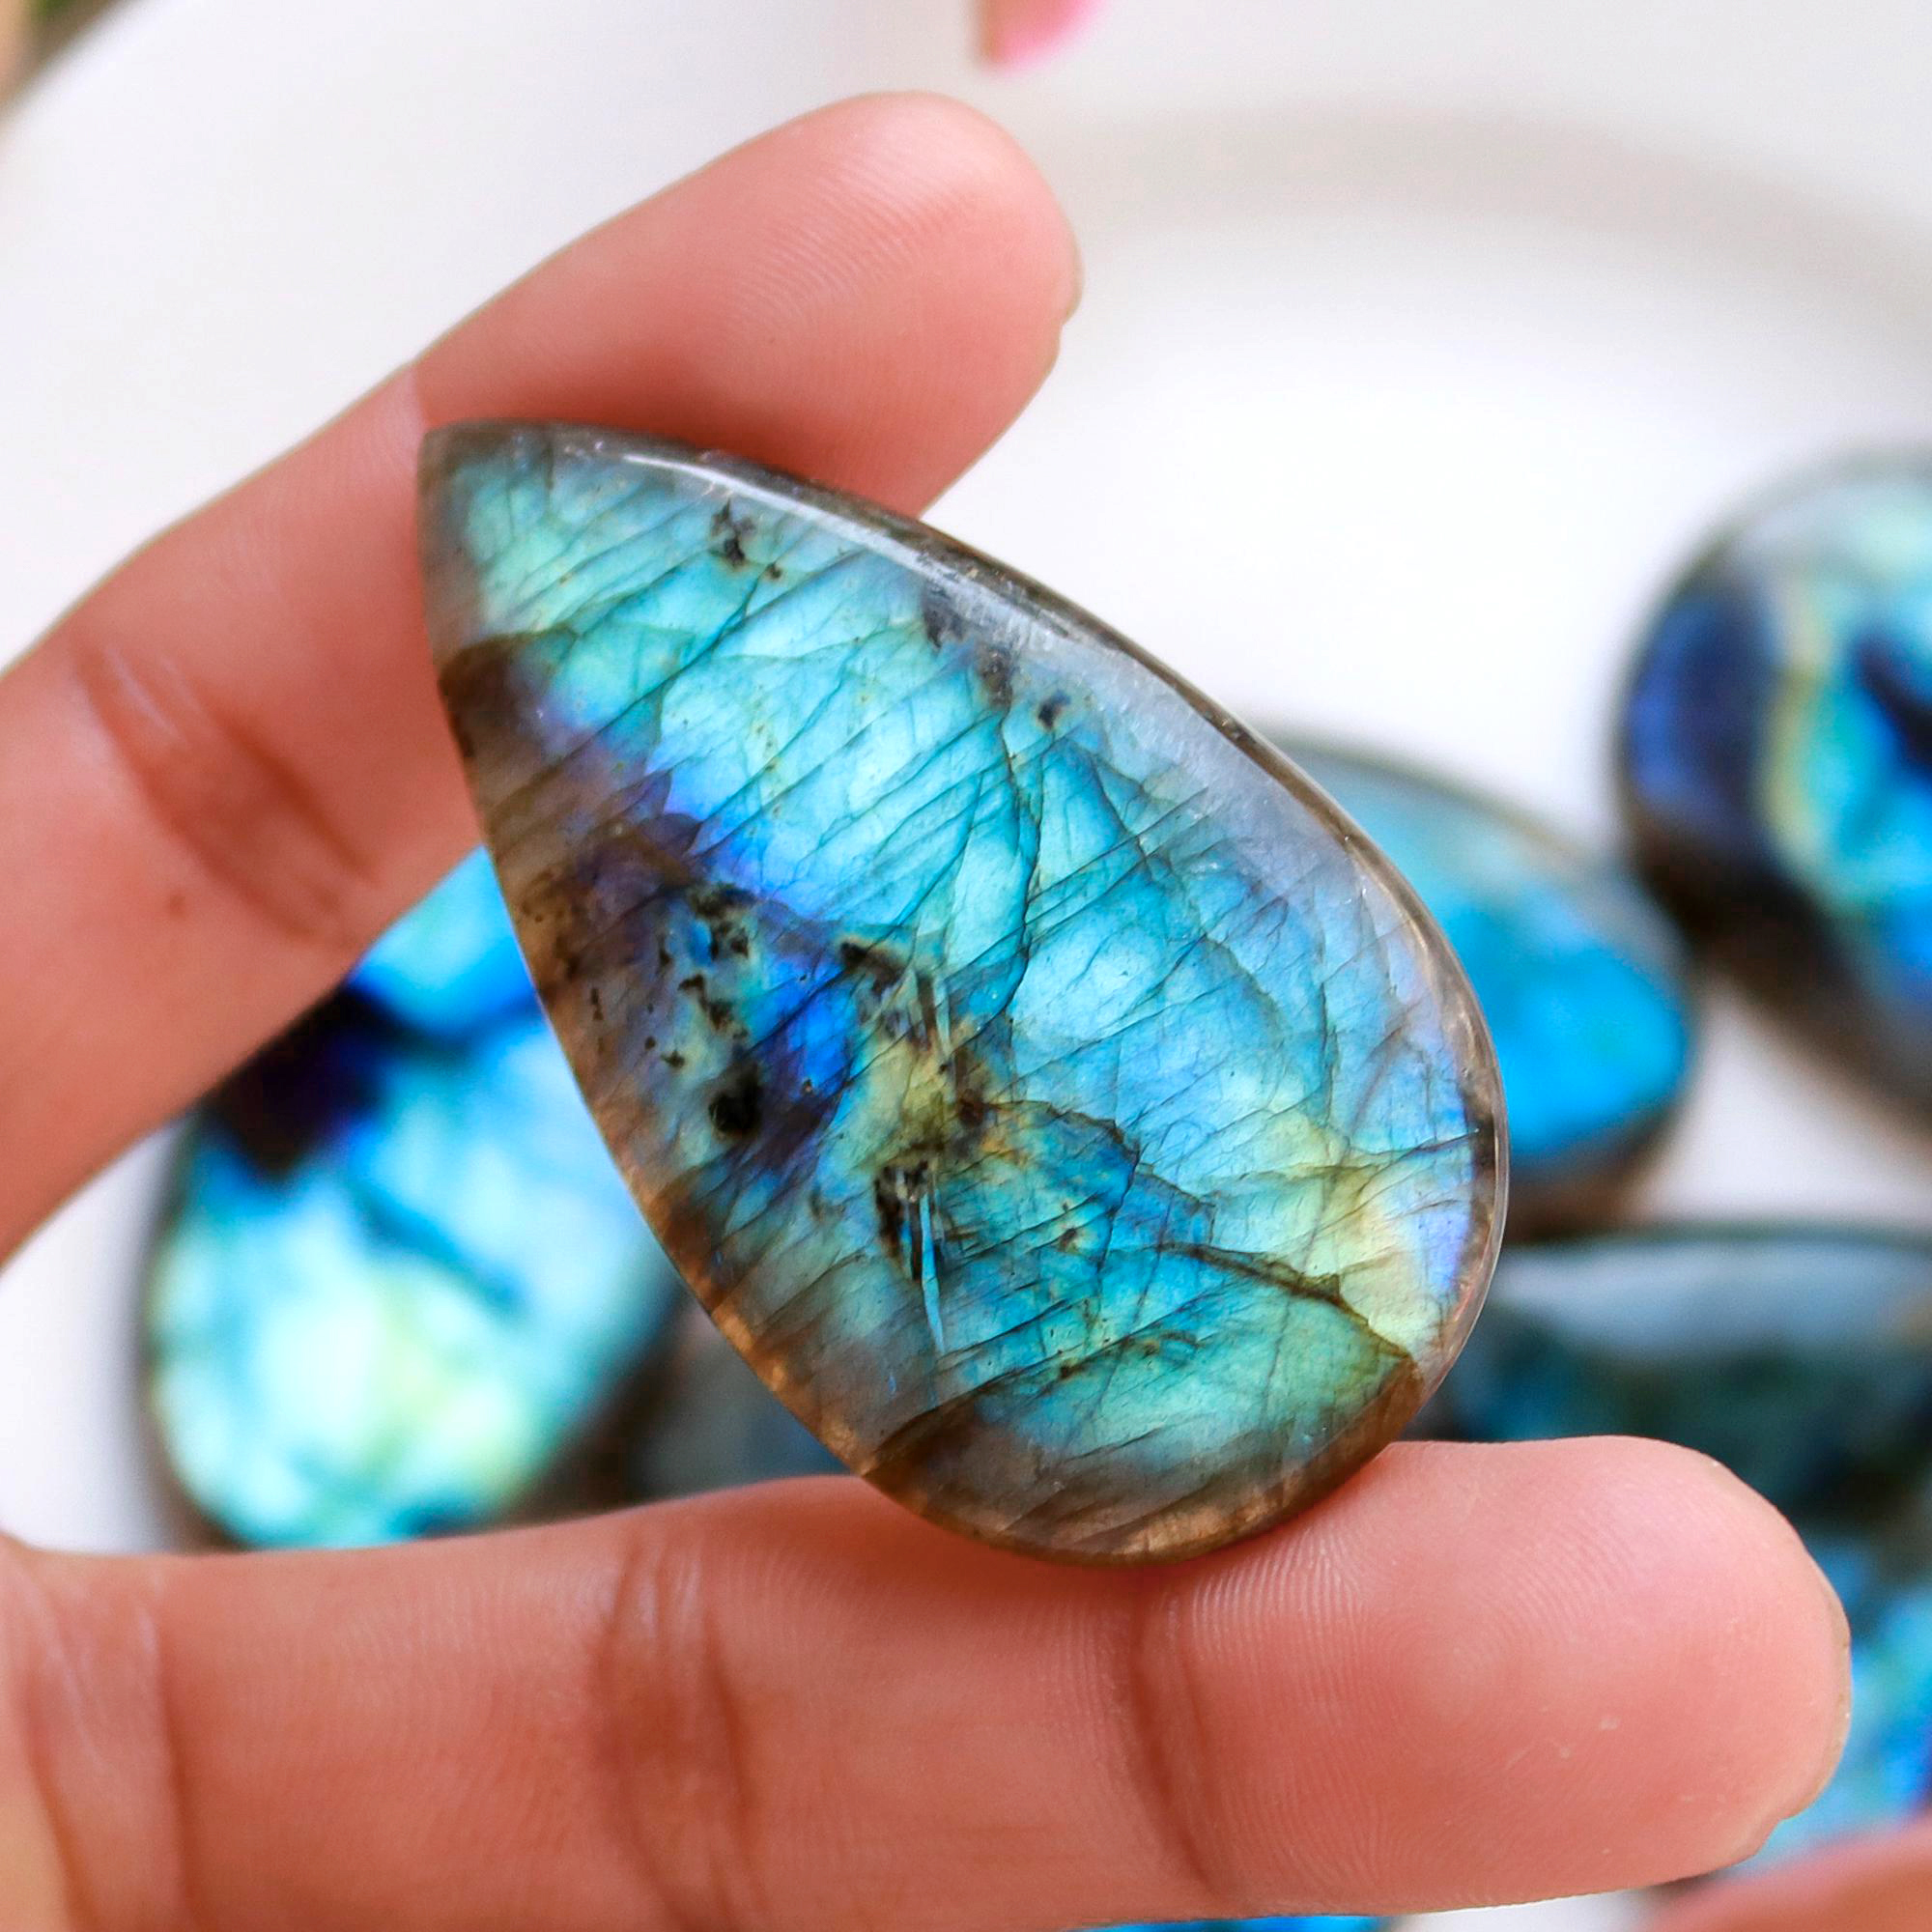 8 Pcs.670 Cts Natural labradorite Cabochon Loose Gemstone For Jewelry Wholesale Lot Size 55x30 40x24mm#1114